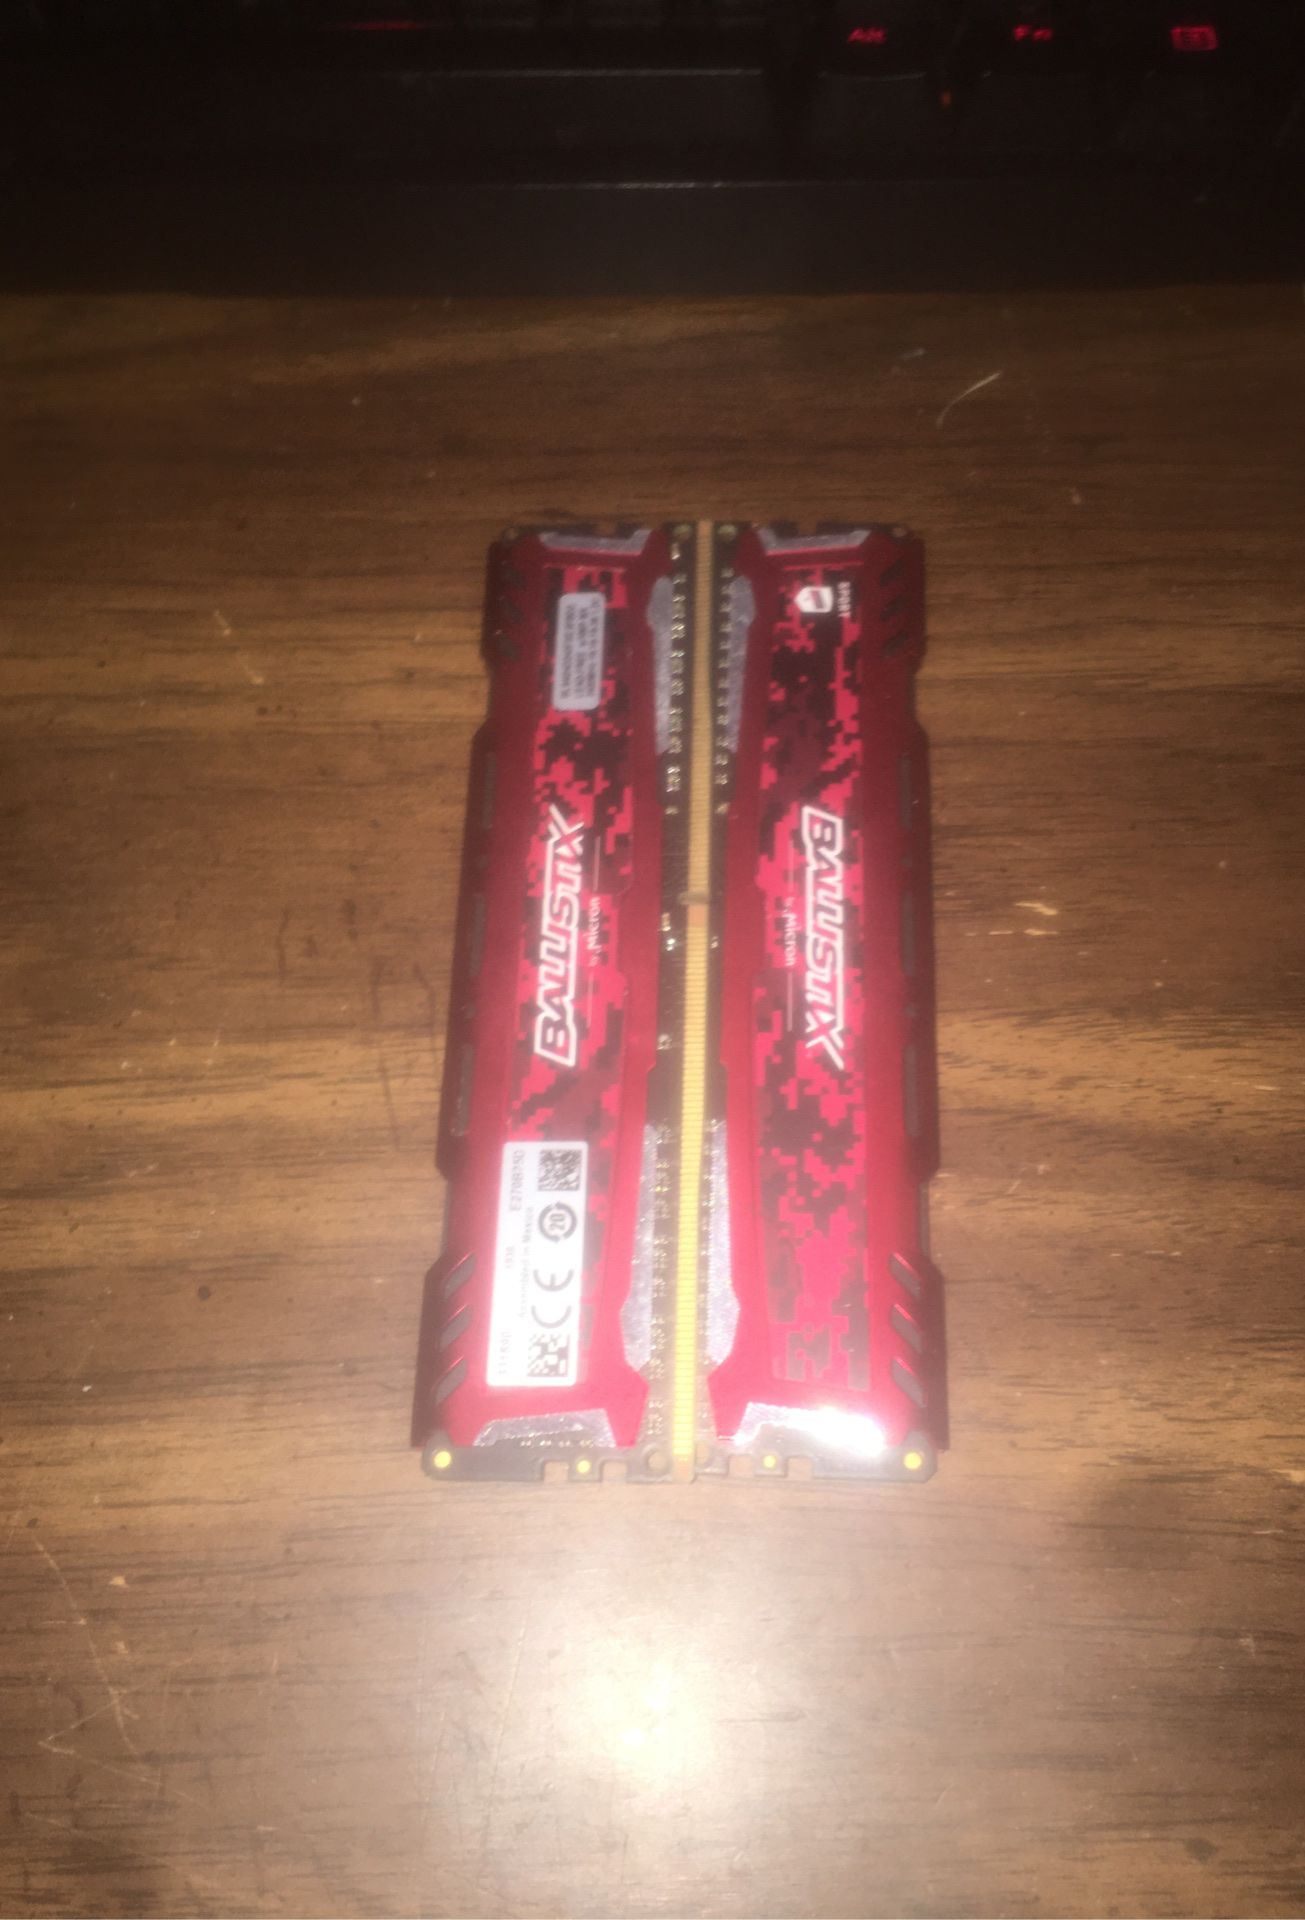 Two sticks of 4g of ram 8 in total